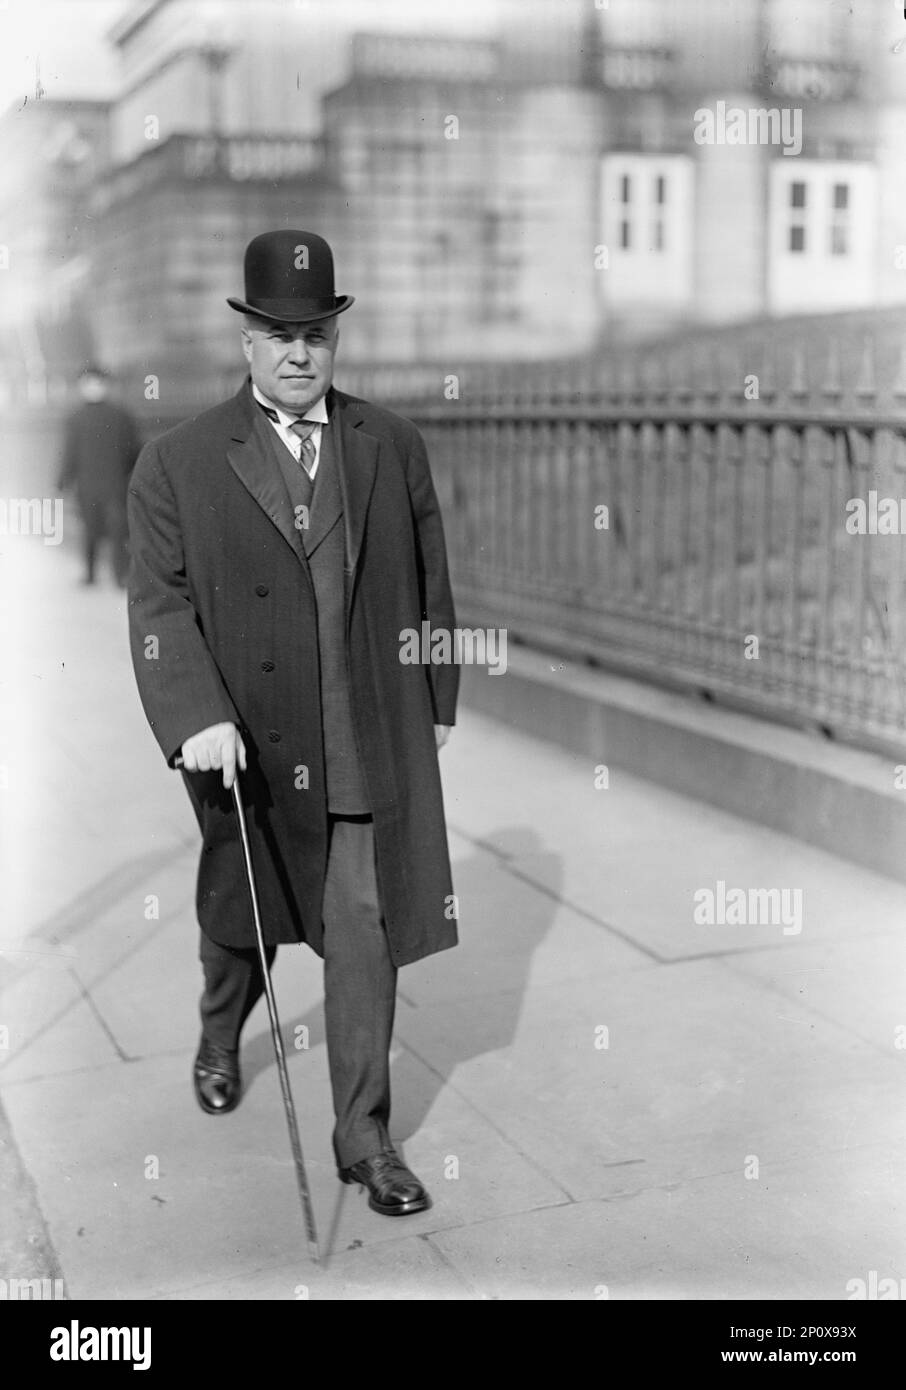 Franklin Knight Lane, 1913. Commissioner of the Interstate Commerce Commission 1905-1913, Secretary of the Interior 1913-1920. Stock Photo